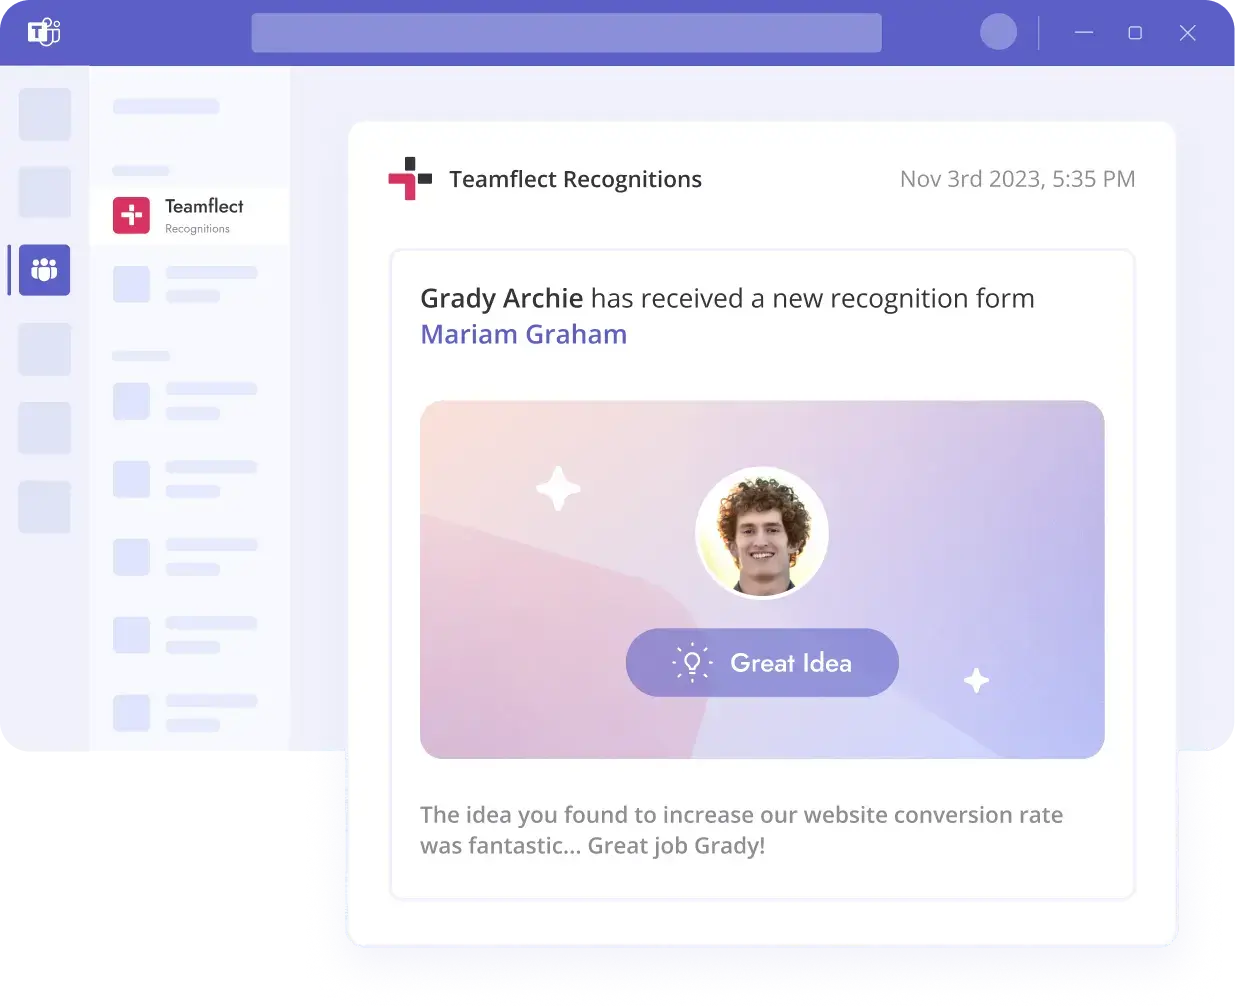  Teamflect recognition card in Microsoft Teams channels